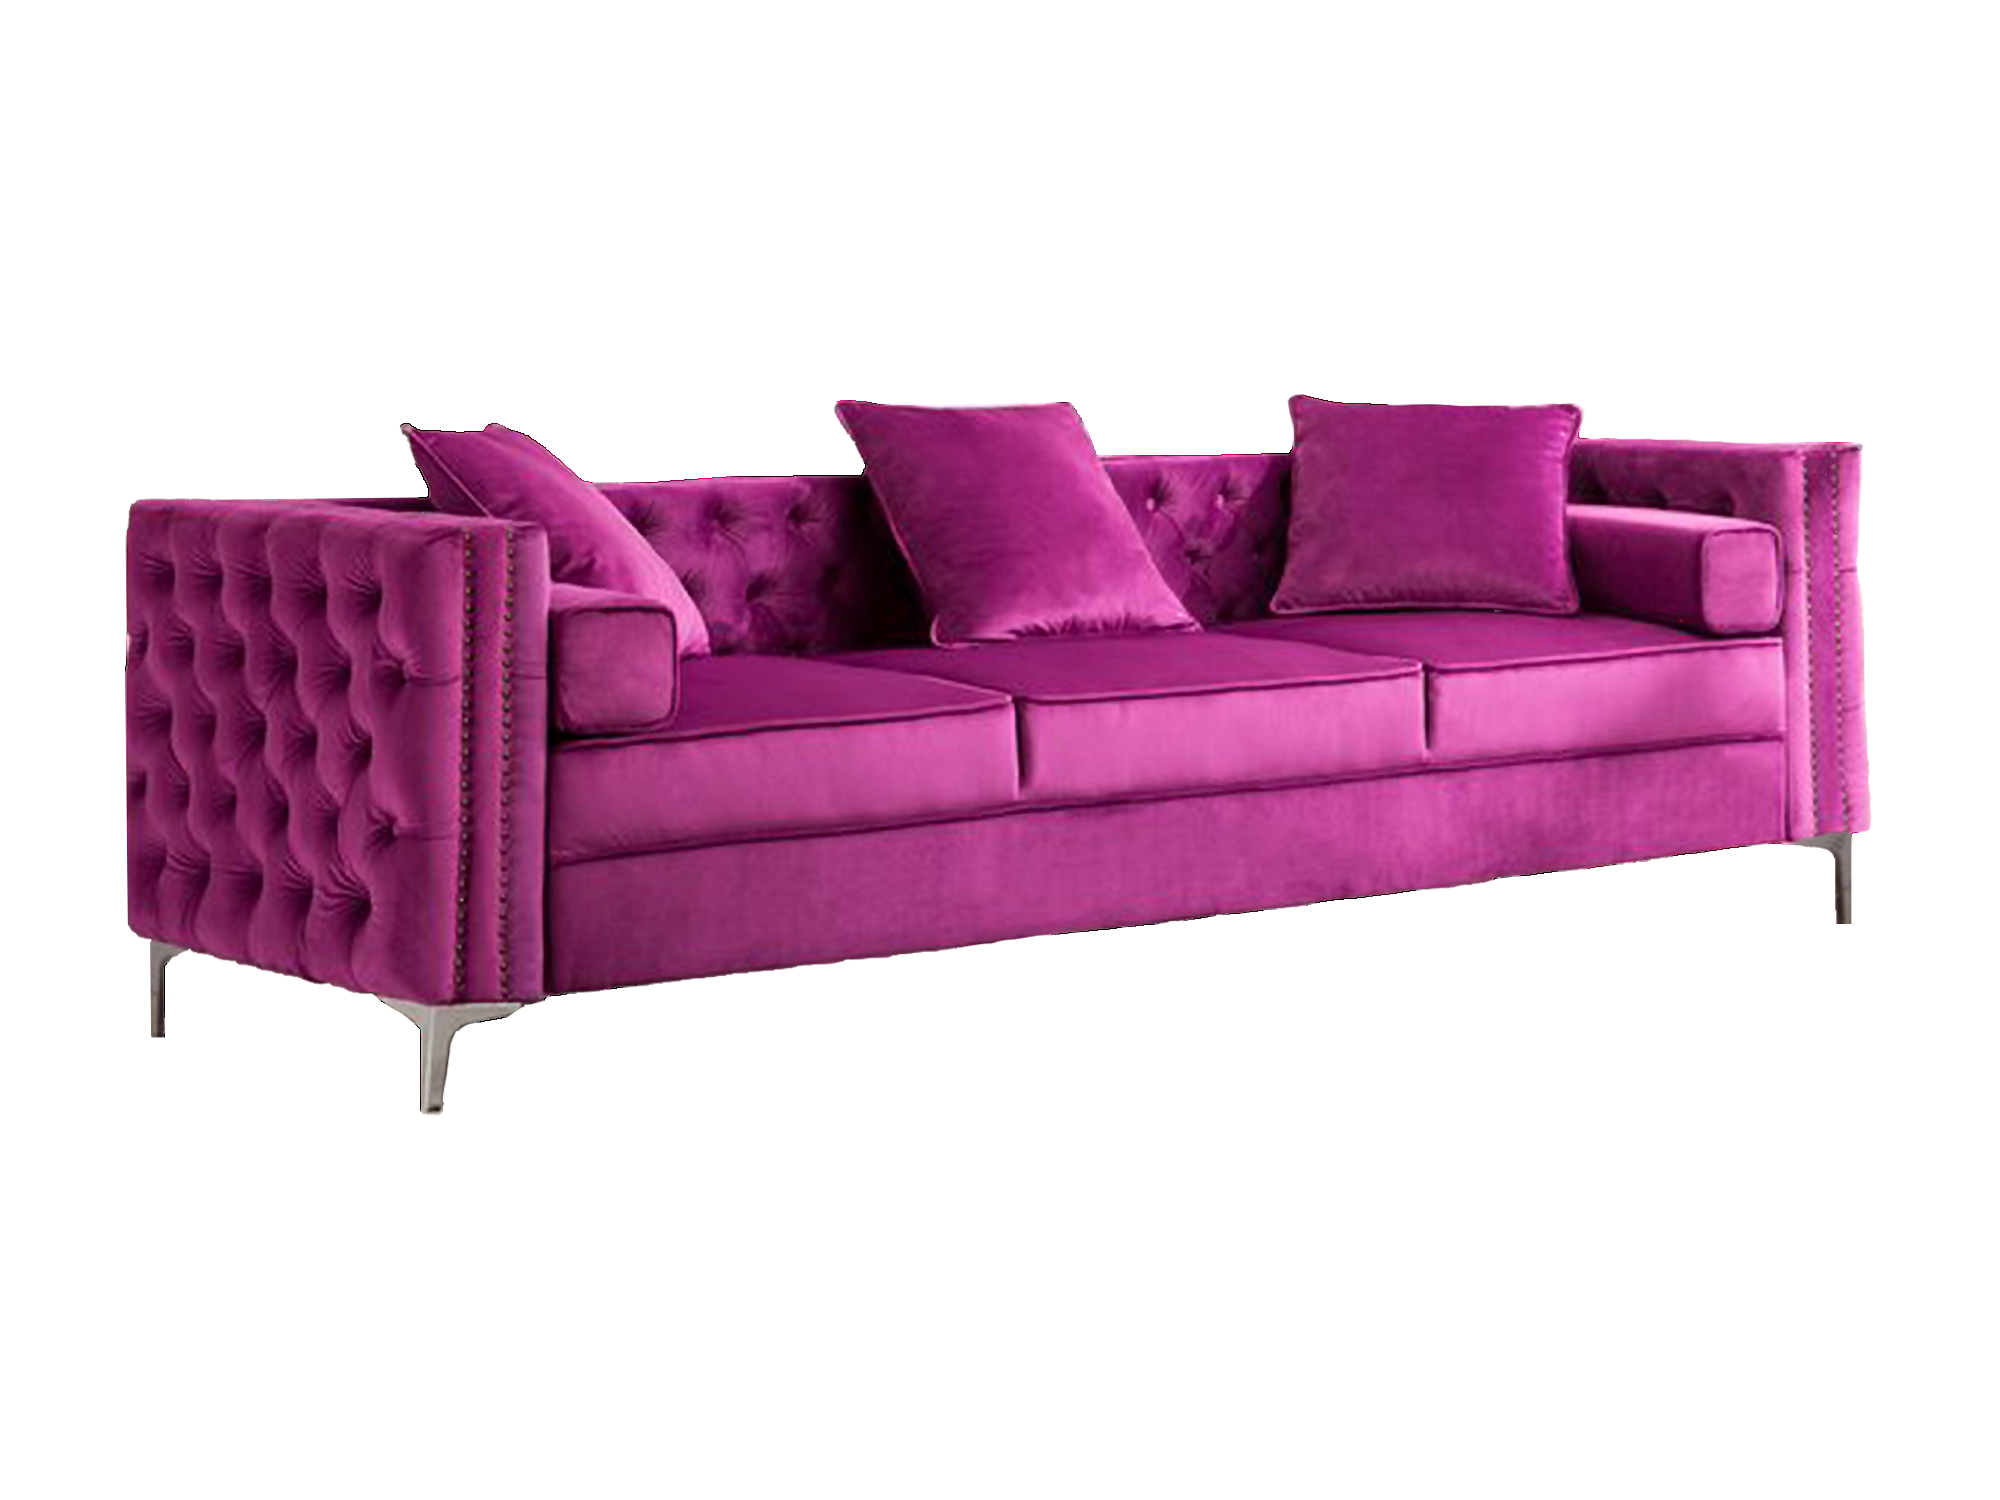 Sofa, Loveseat & Chaise Lounge Rentals